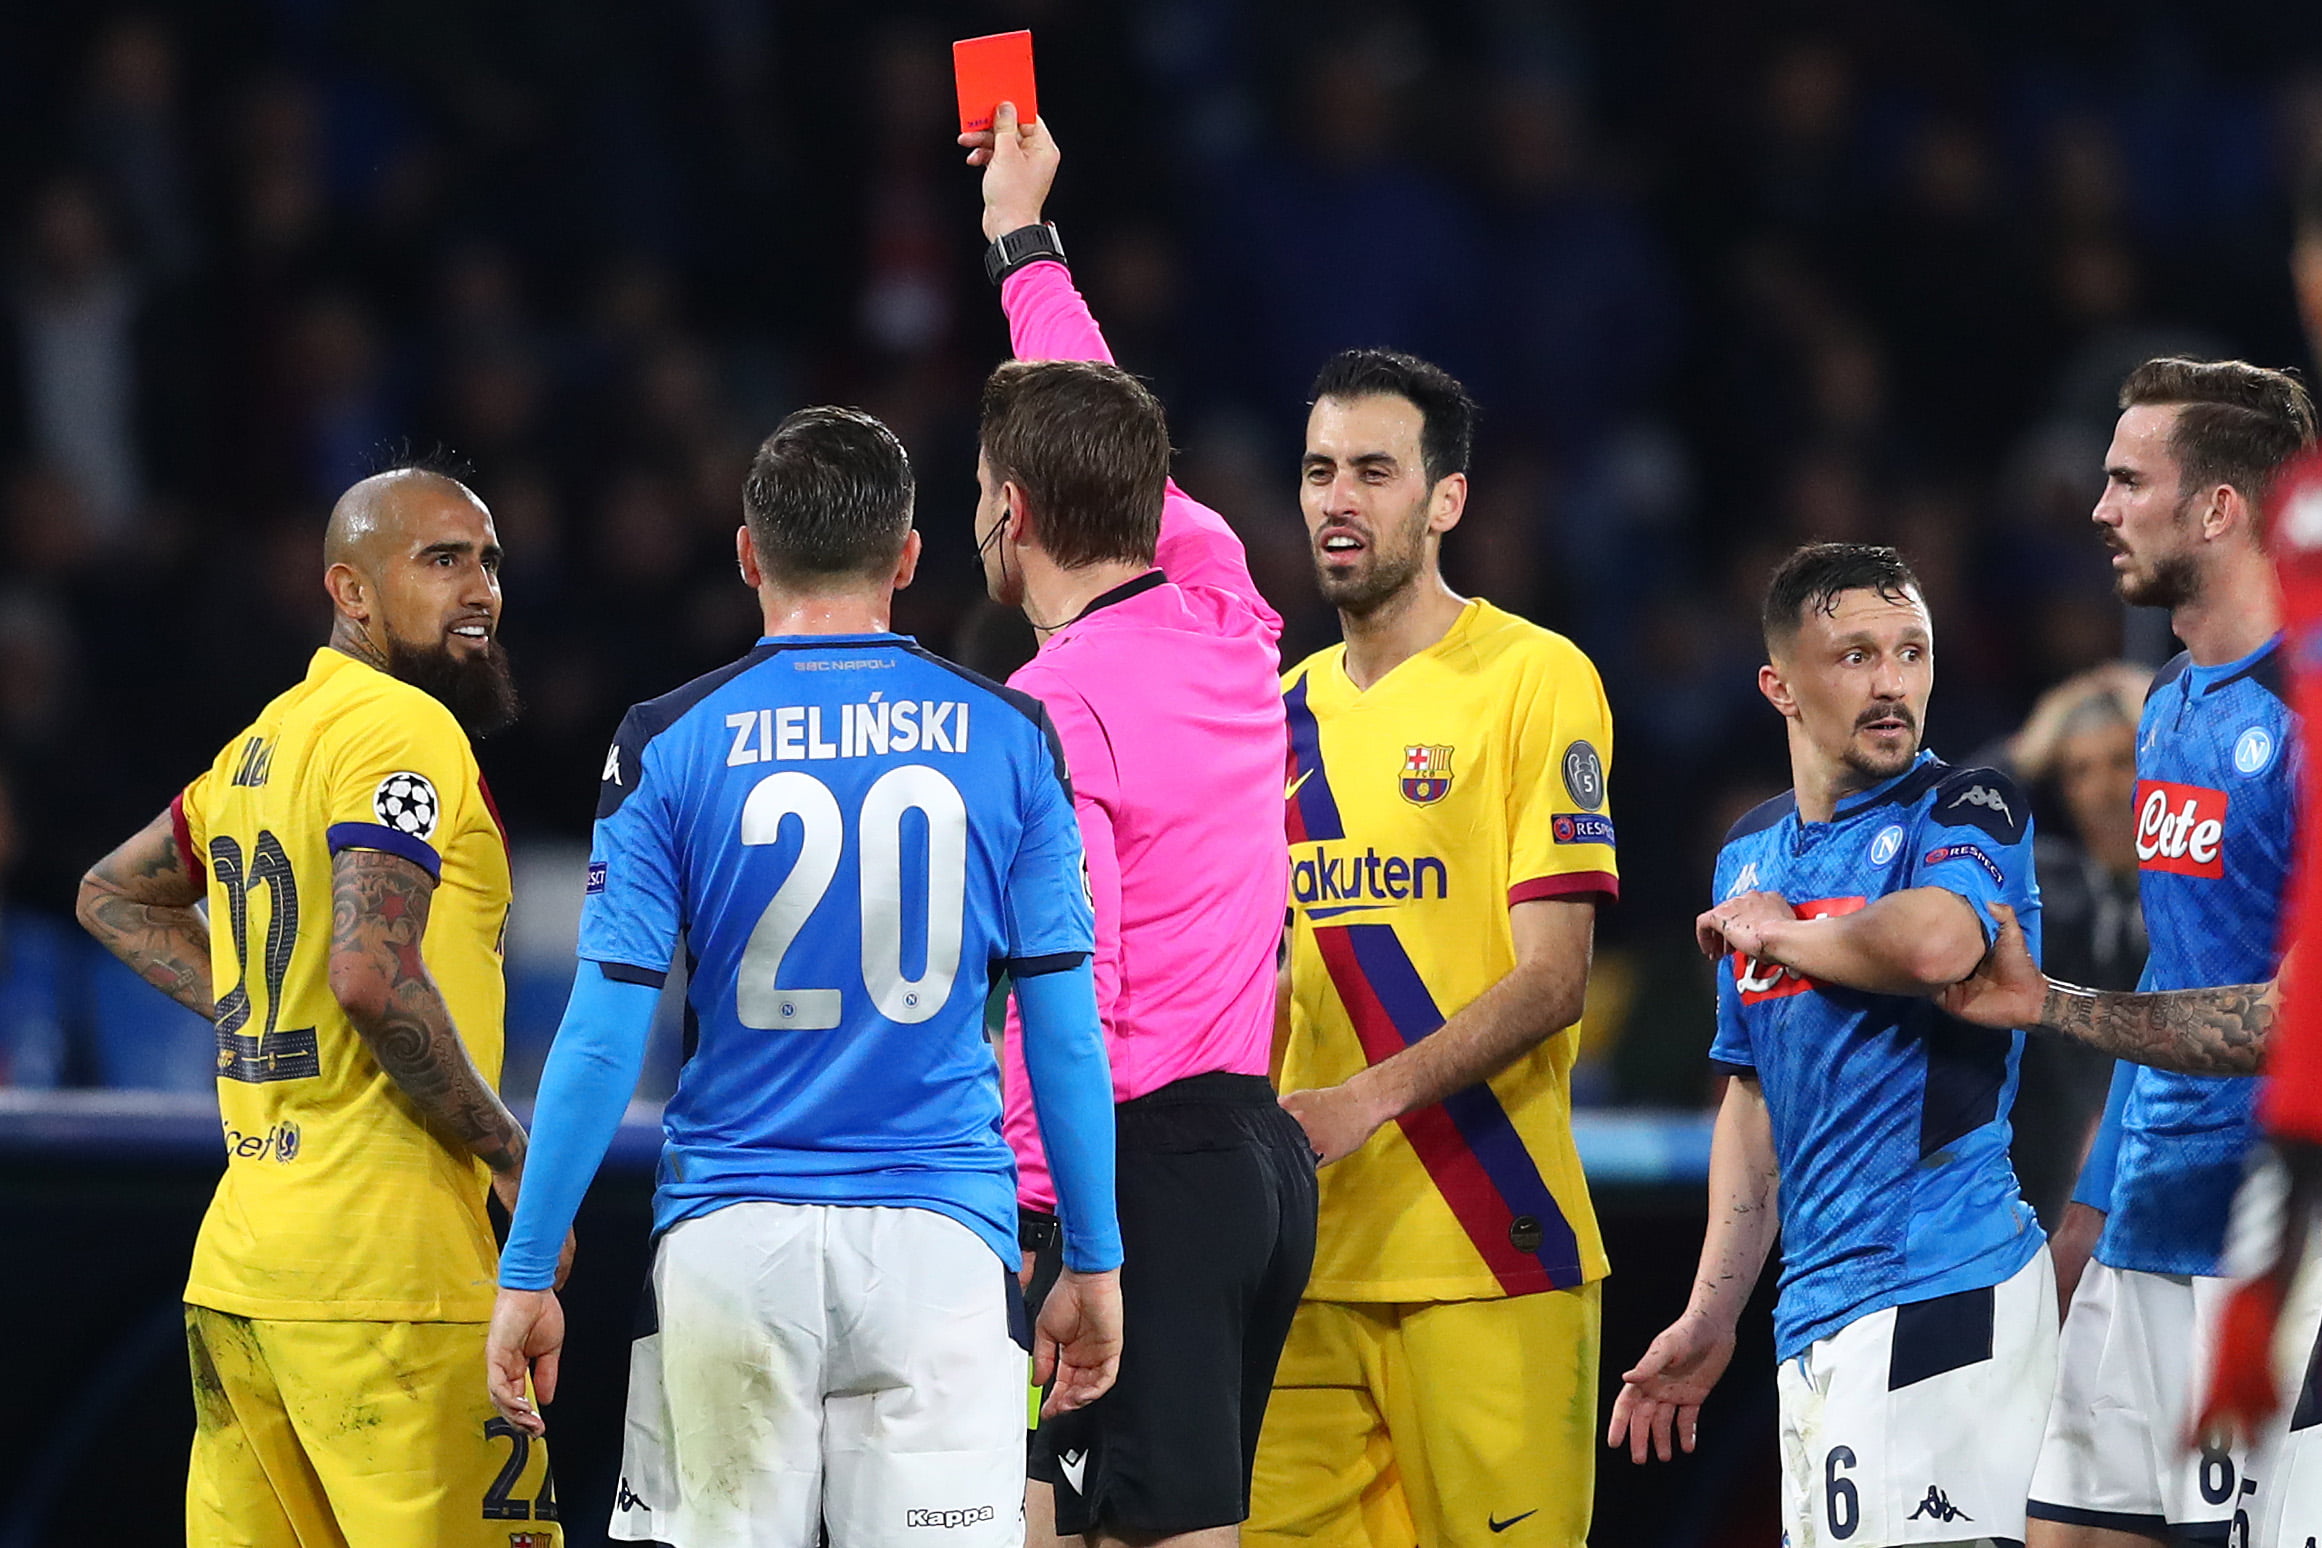 Arturo Vidal (L) of Barcelona is shown a red card by referee Mark Borsch of Germany during the UEFA Champions League round of 16 first leg match between SSC Napoli and FC Barcelona at Stadio San Paolo on February 25, 2020 in Naples, Italy. (Photo by Michael Steele/Getty Images)